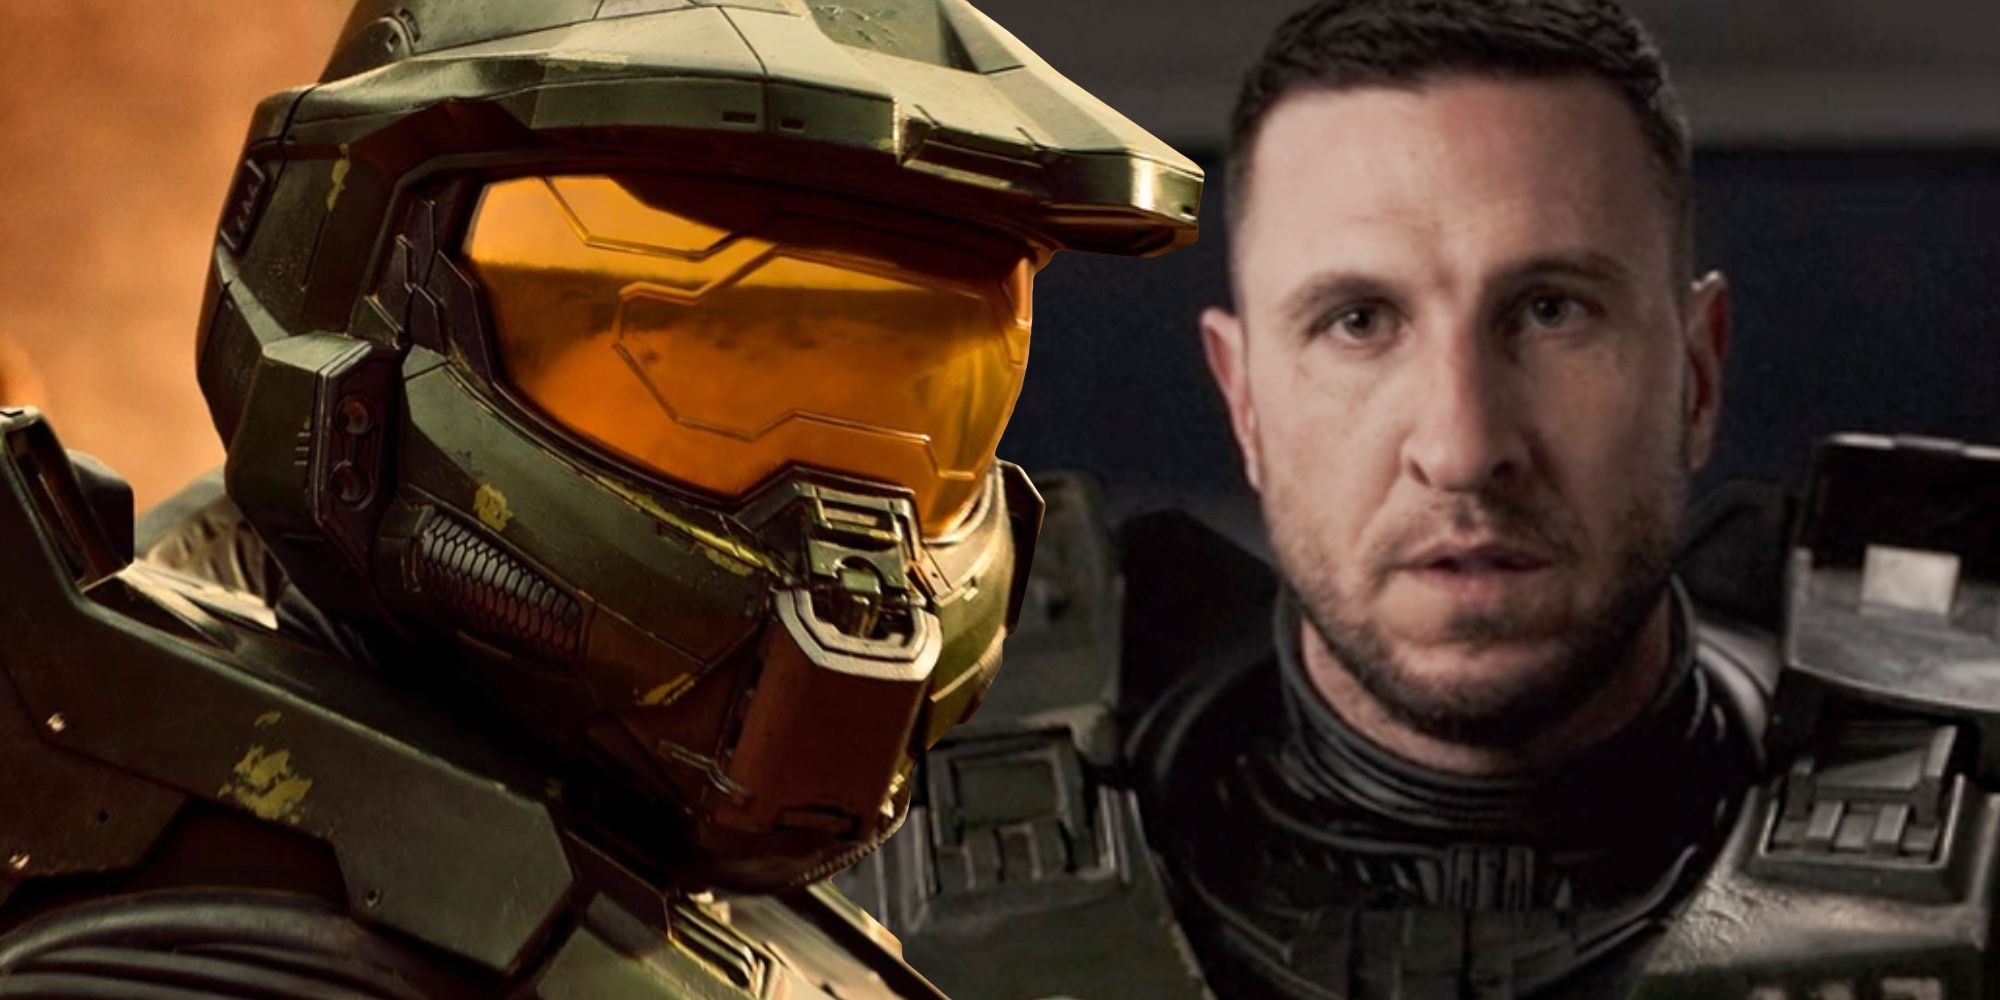 Anyone else think Jocko should have played Master Chief with Steve Downes  voicing acting? : r/halo